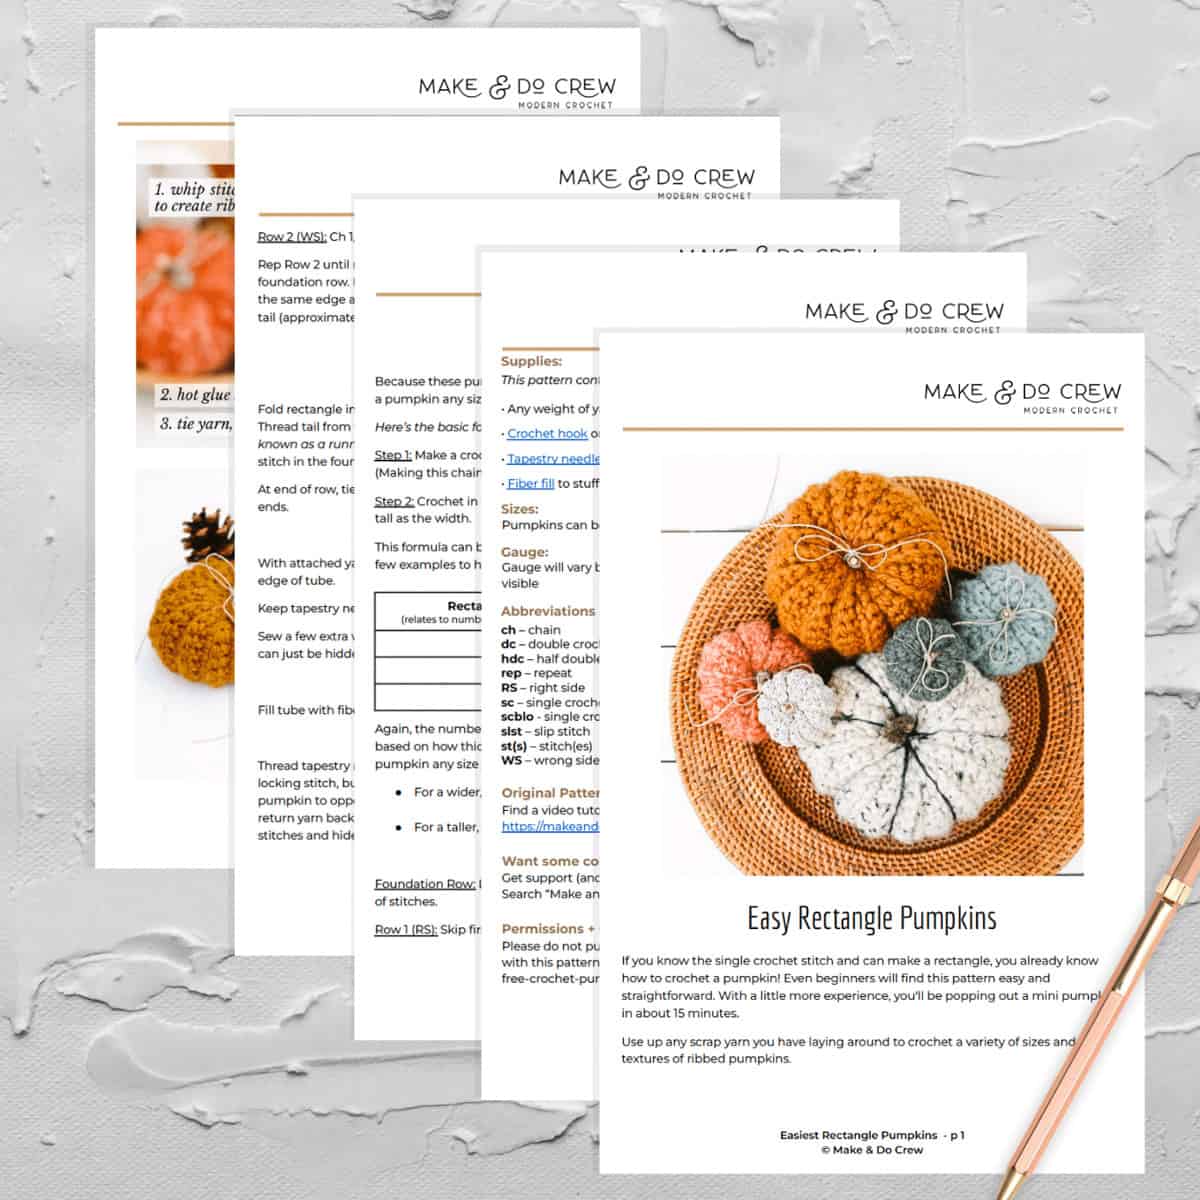 An overhead view of several pages of a printed crochet pumpkin pattern on a white rustic tabletop.